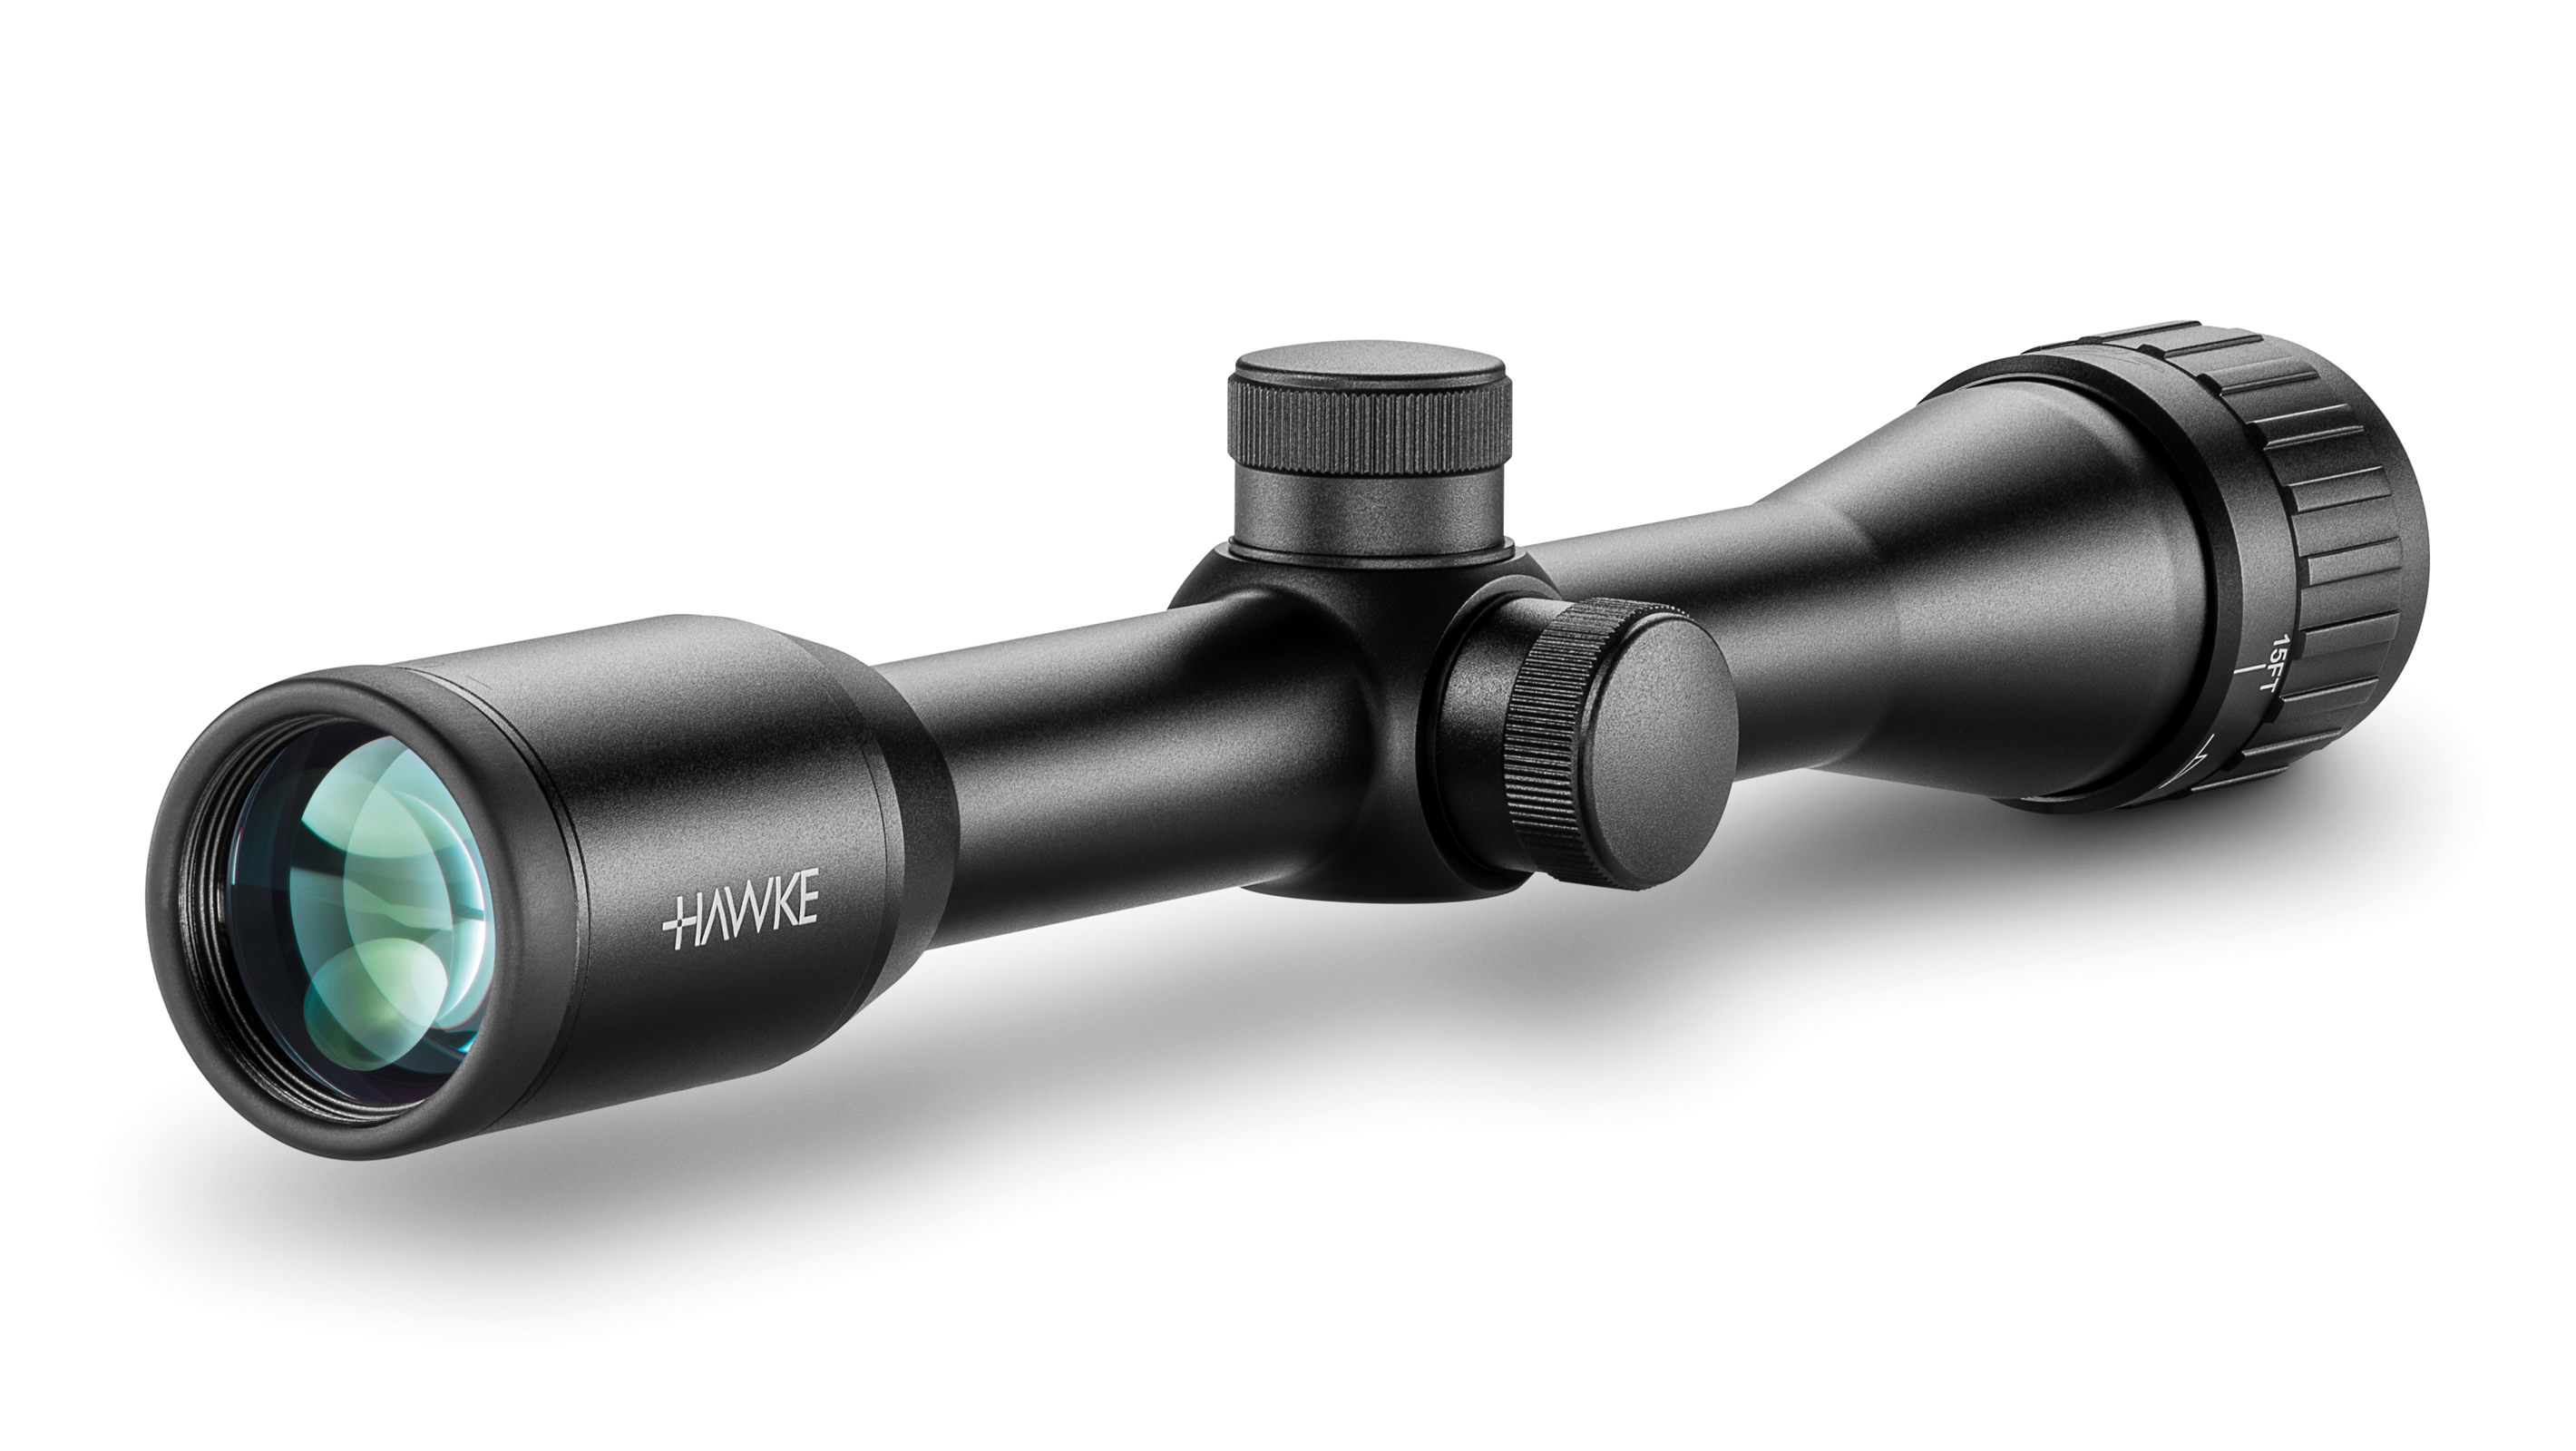 Ocular End View Of The Hawke Vantage HERE Rifle Scope